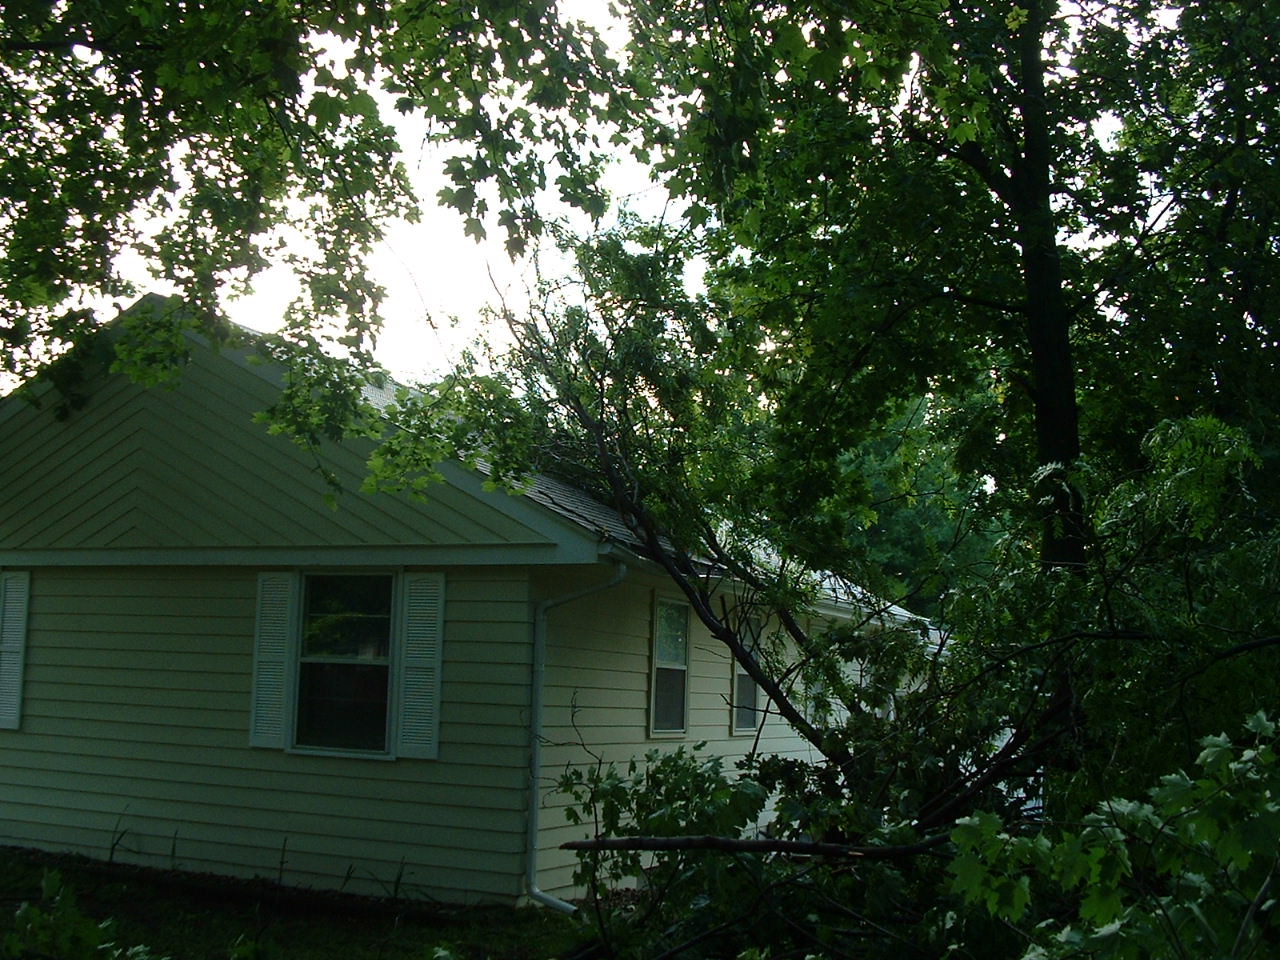 Another view of the tree on the house.